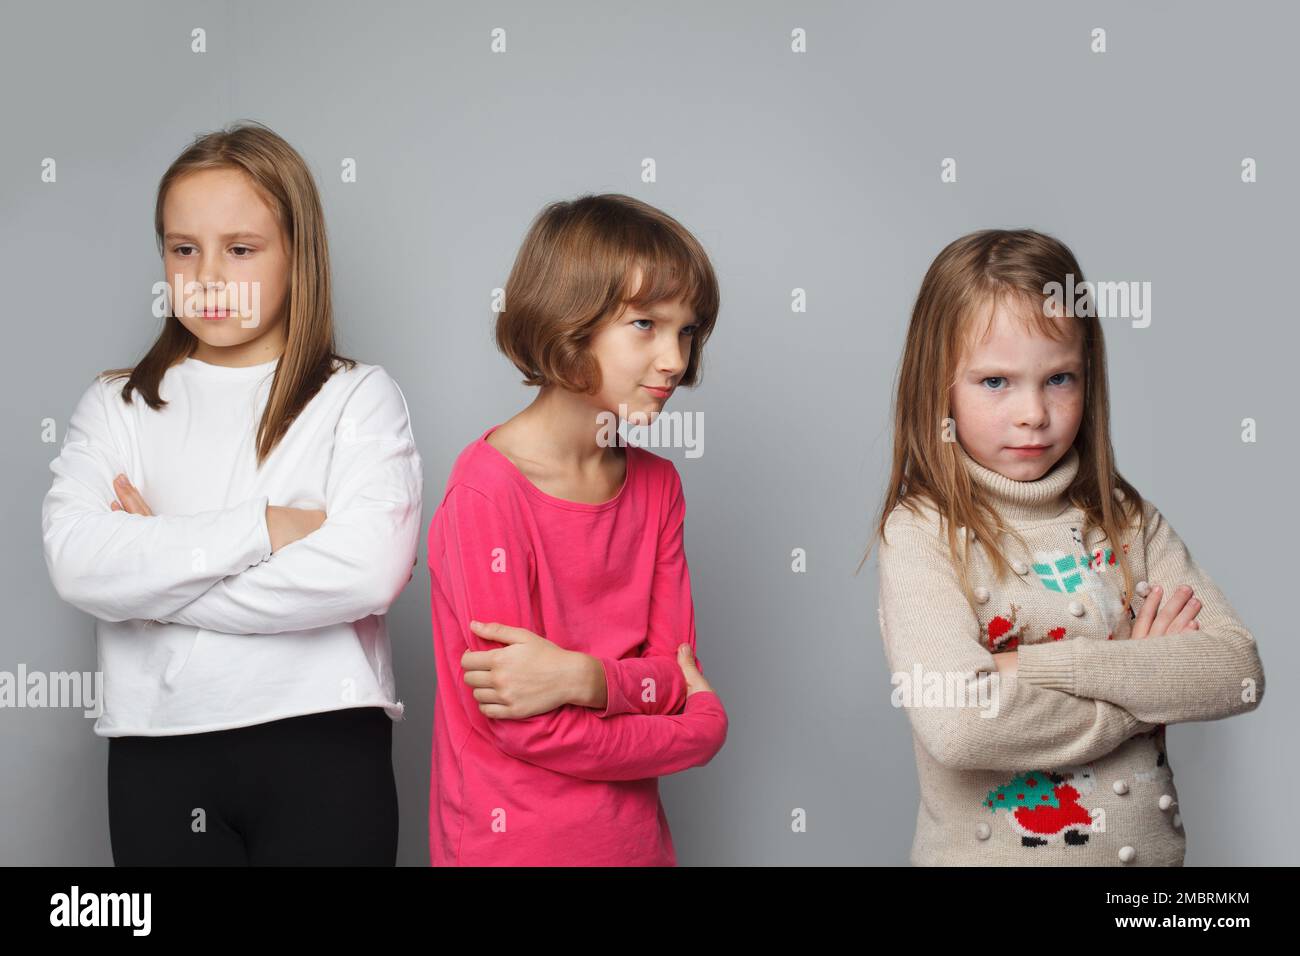 Offended displeased children friends with crossed arms. Young girls 8-10 years old portrait Stock Photo